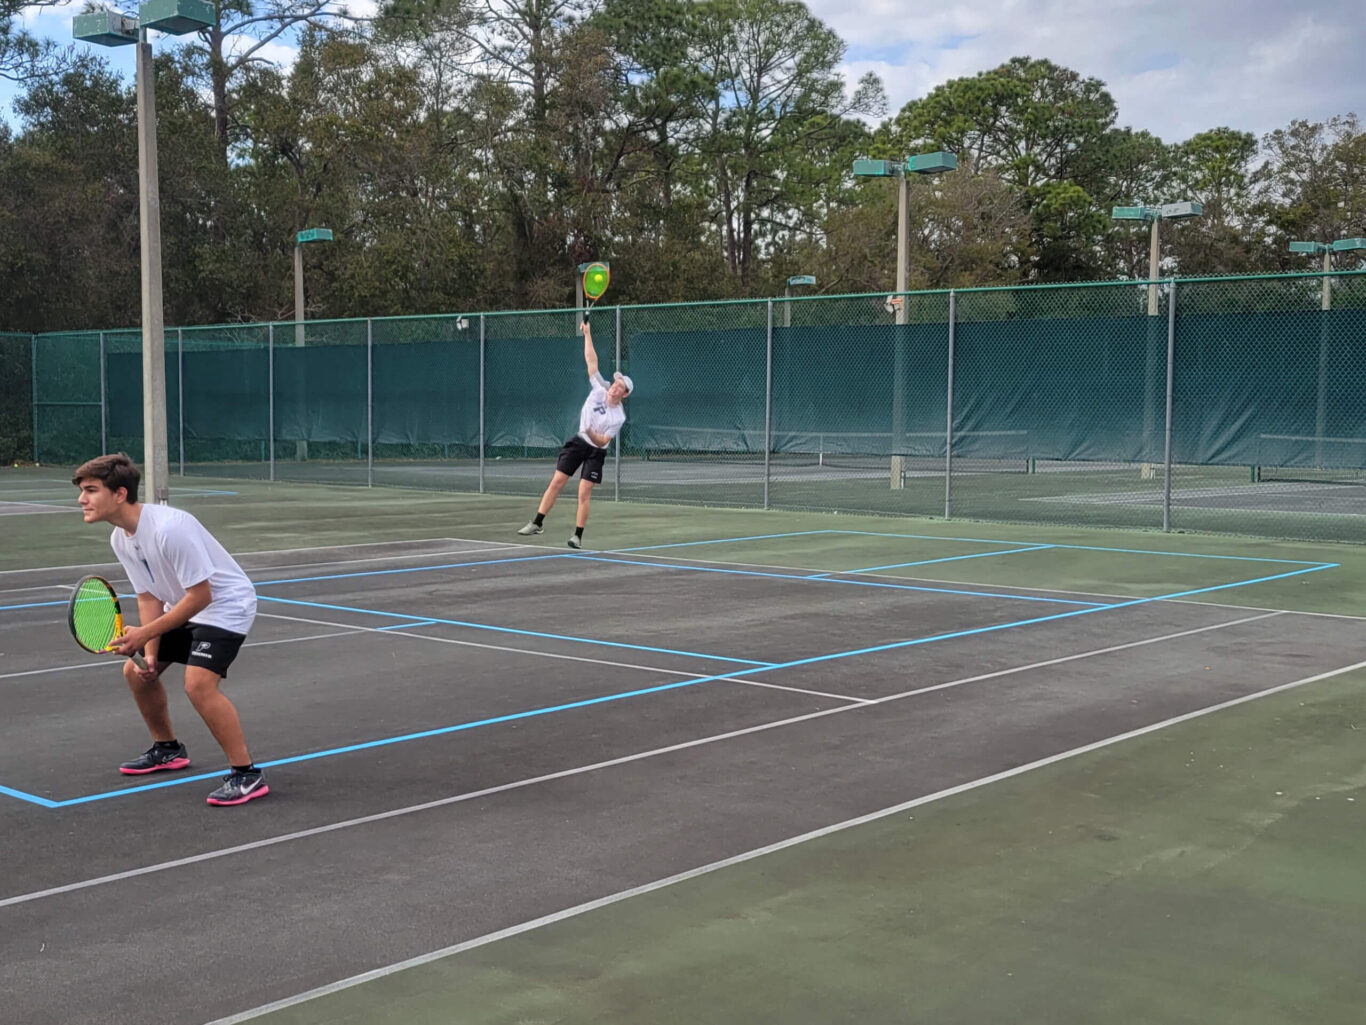 Two boys playing tennis on a tennis court.